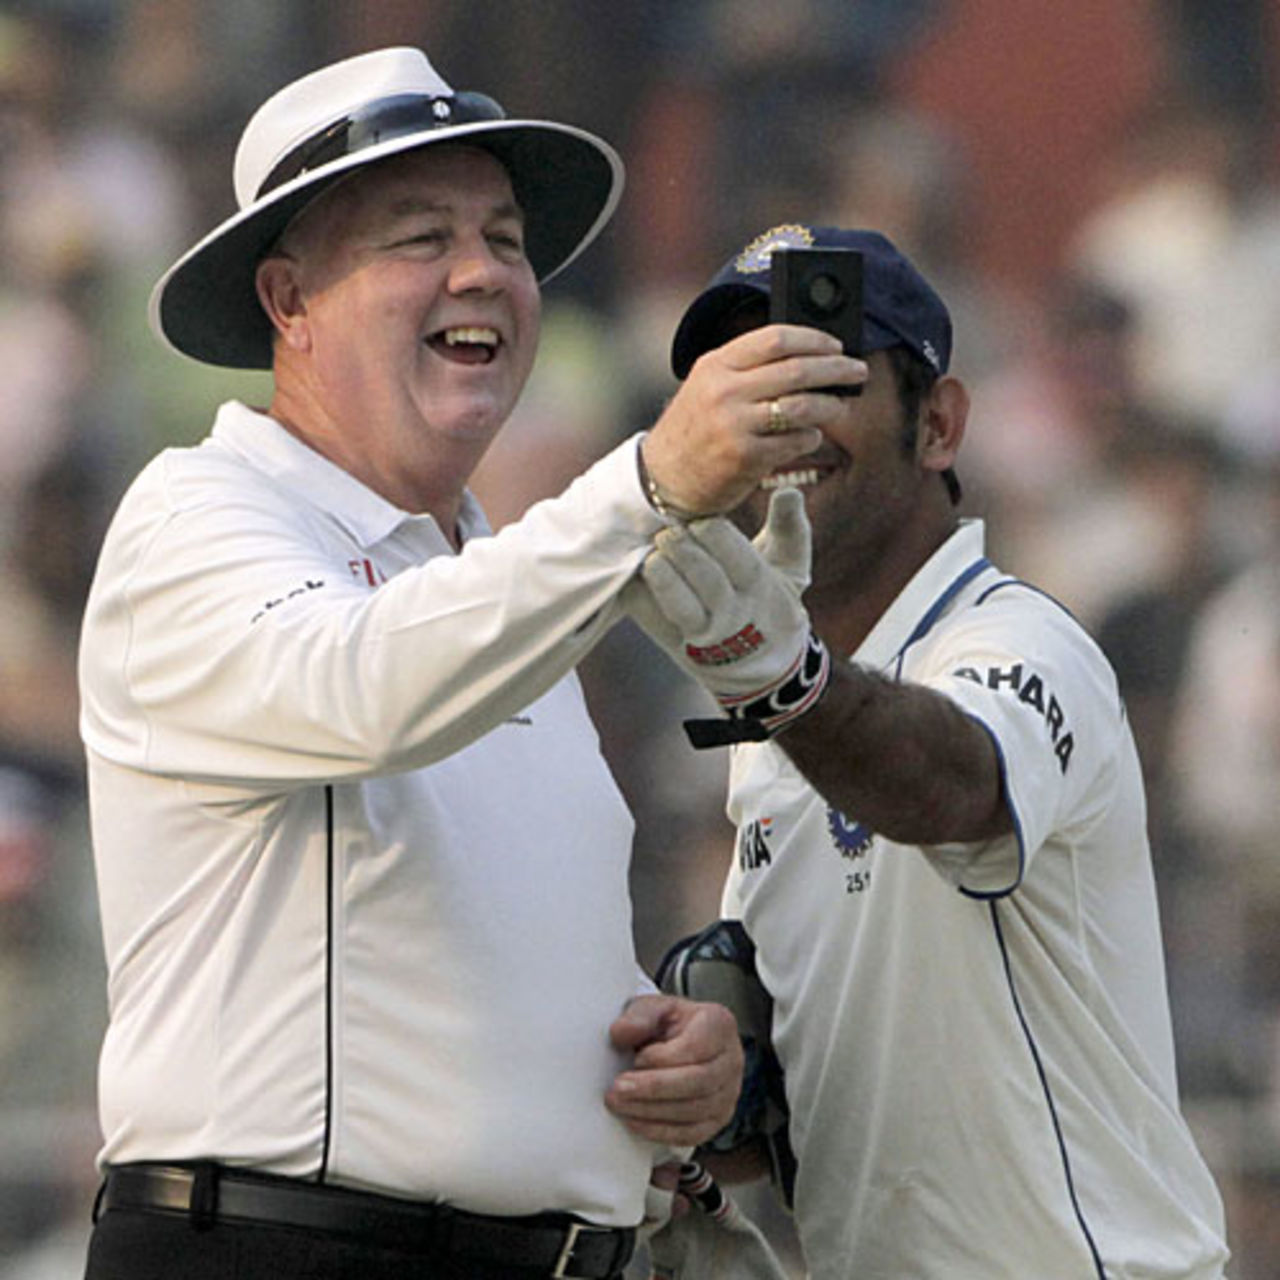 Steve Davis has a laugh while checking the light meter with MS Dhoni, India v South Africa, 2nd Test, Kolkata, 3rd day, February 16, 2010